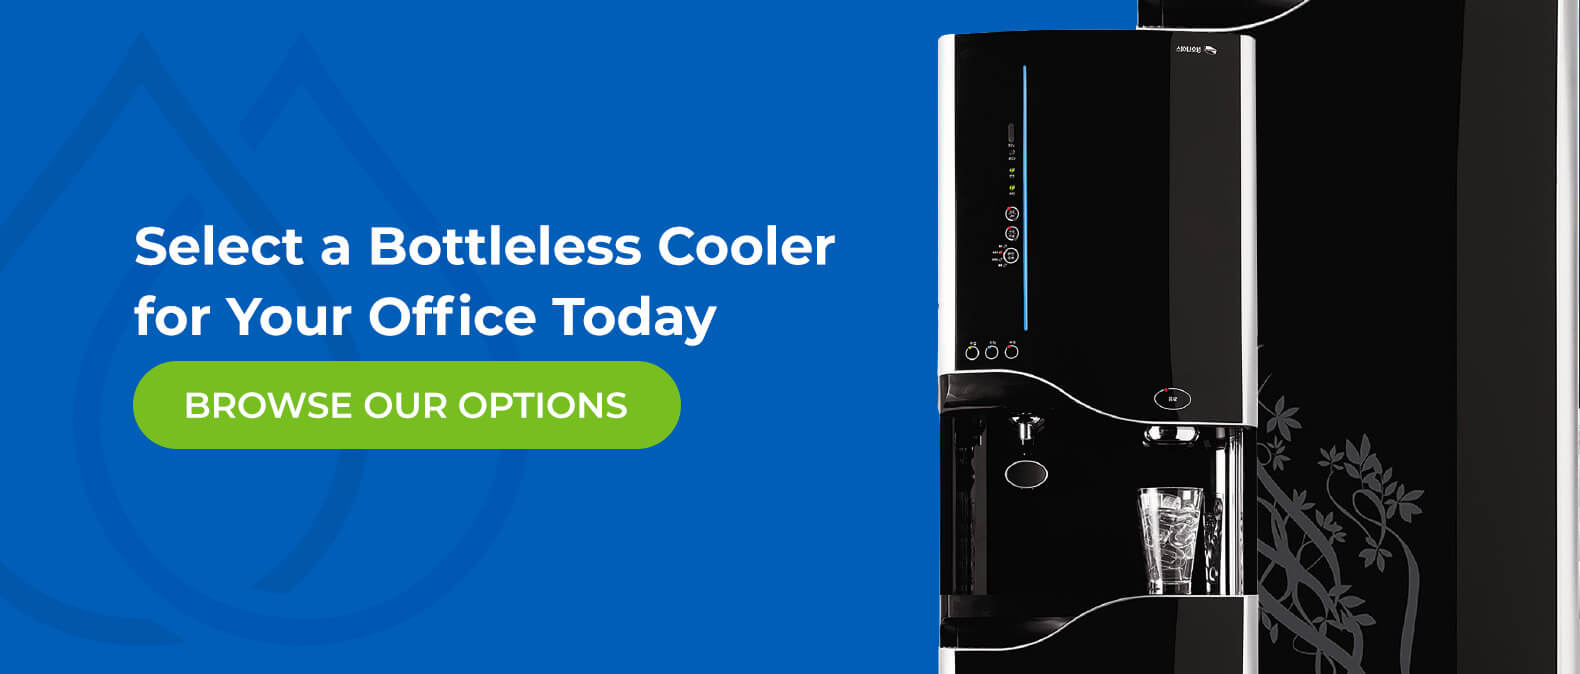 Select a Bottleless Cooler for Your Office Today